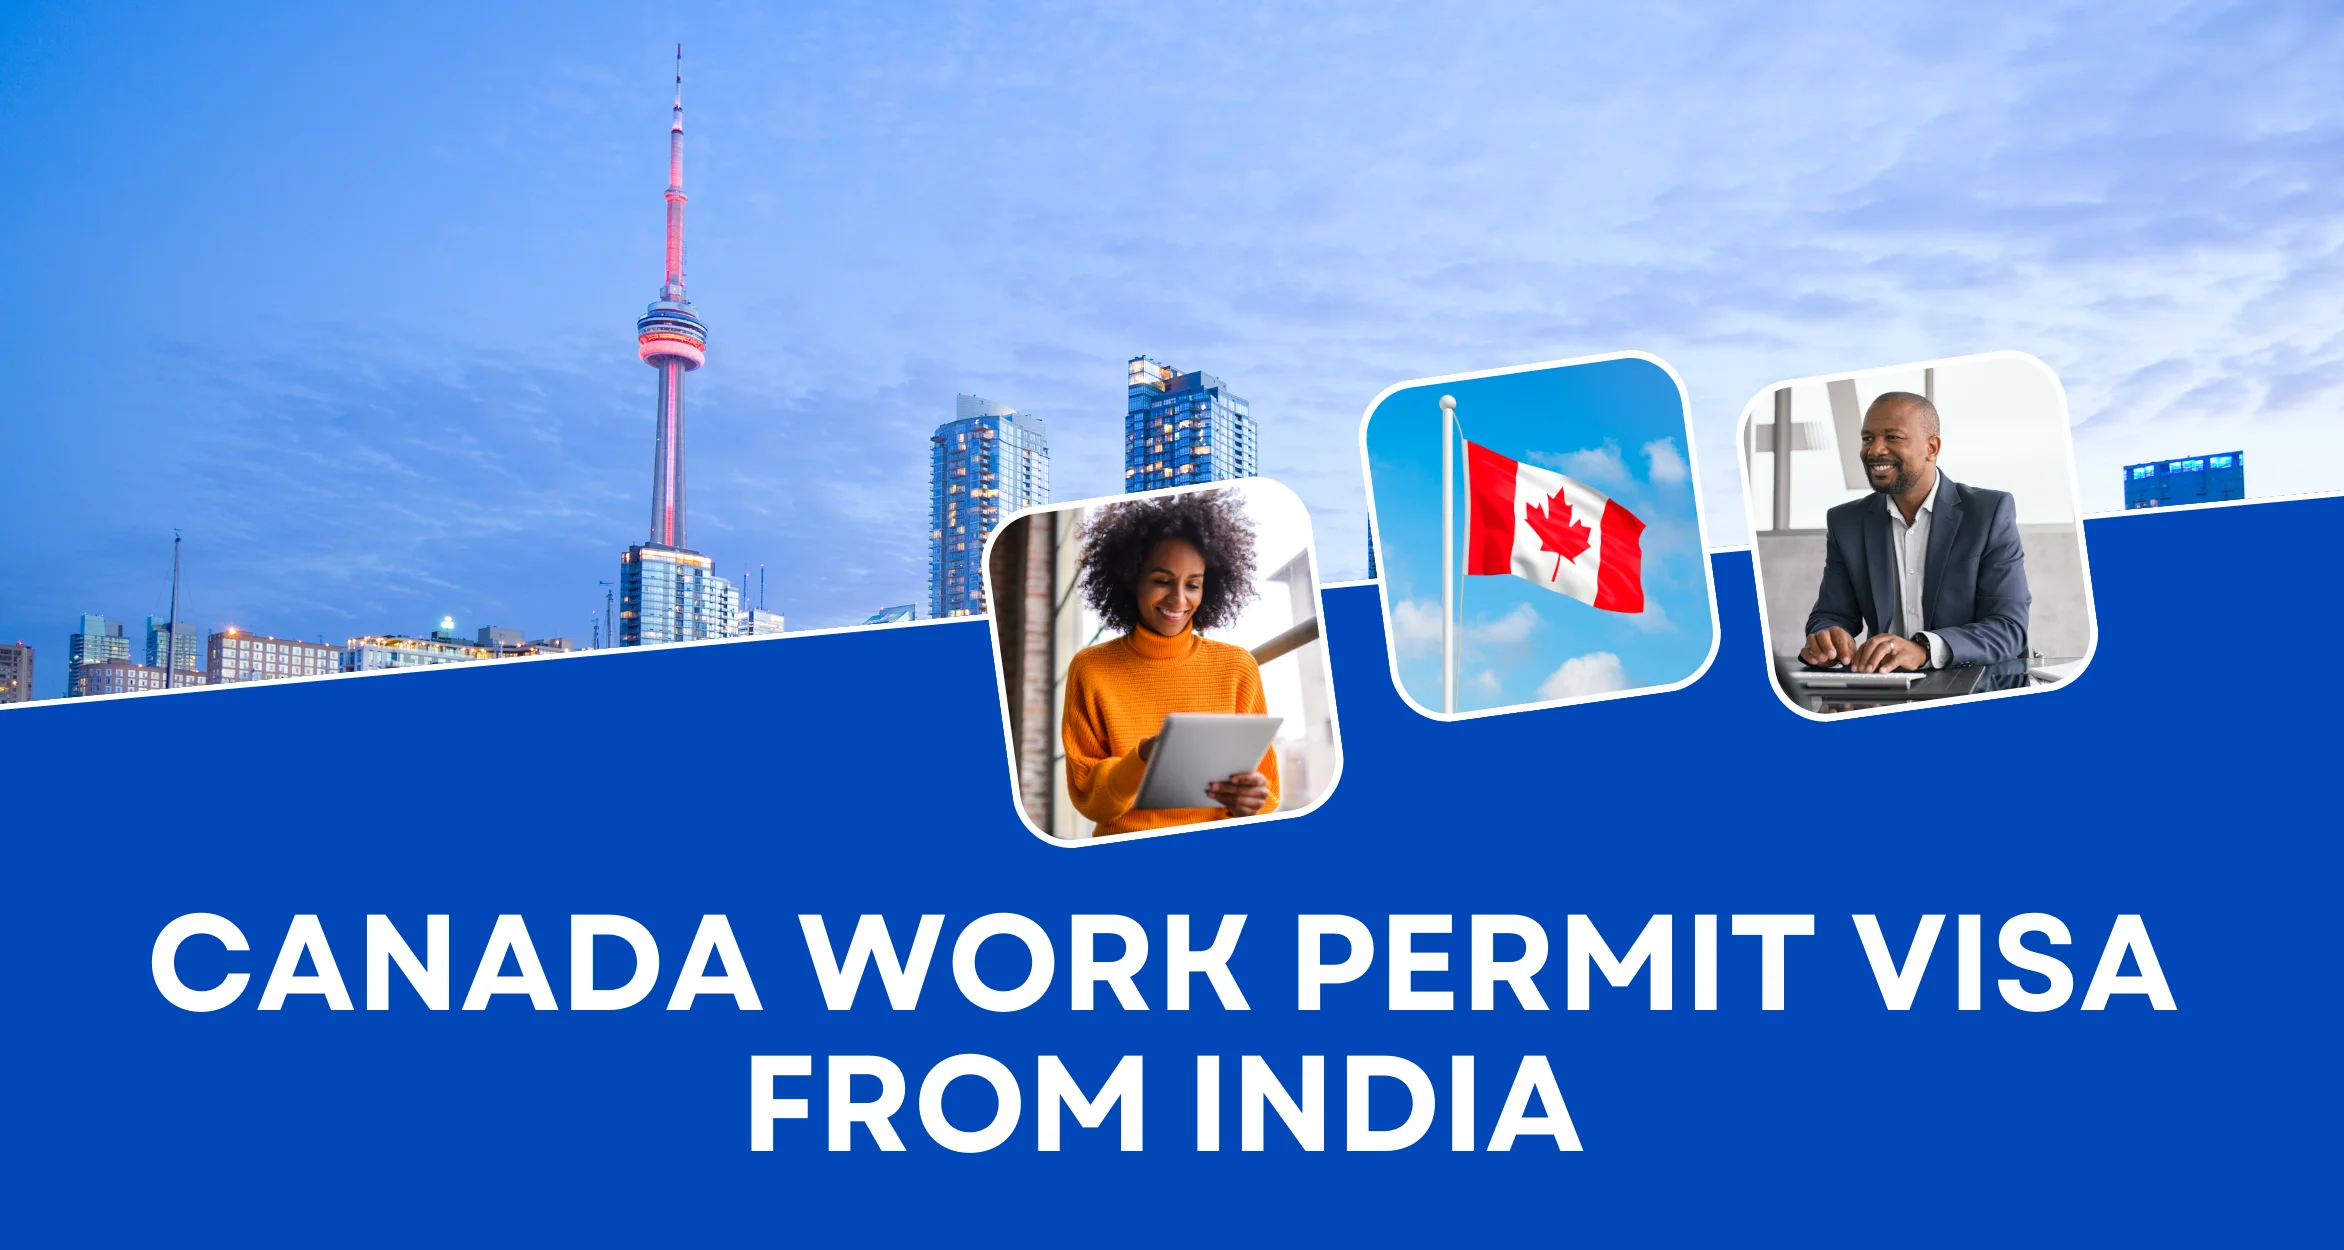 Canada Work Permit Visa from India